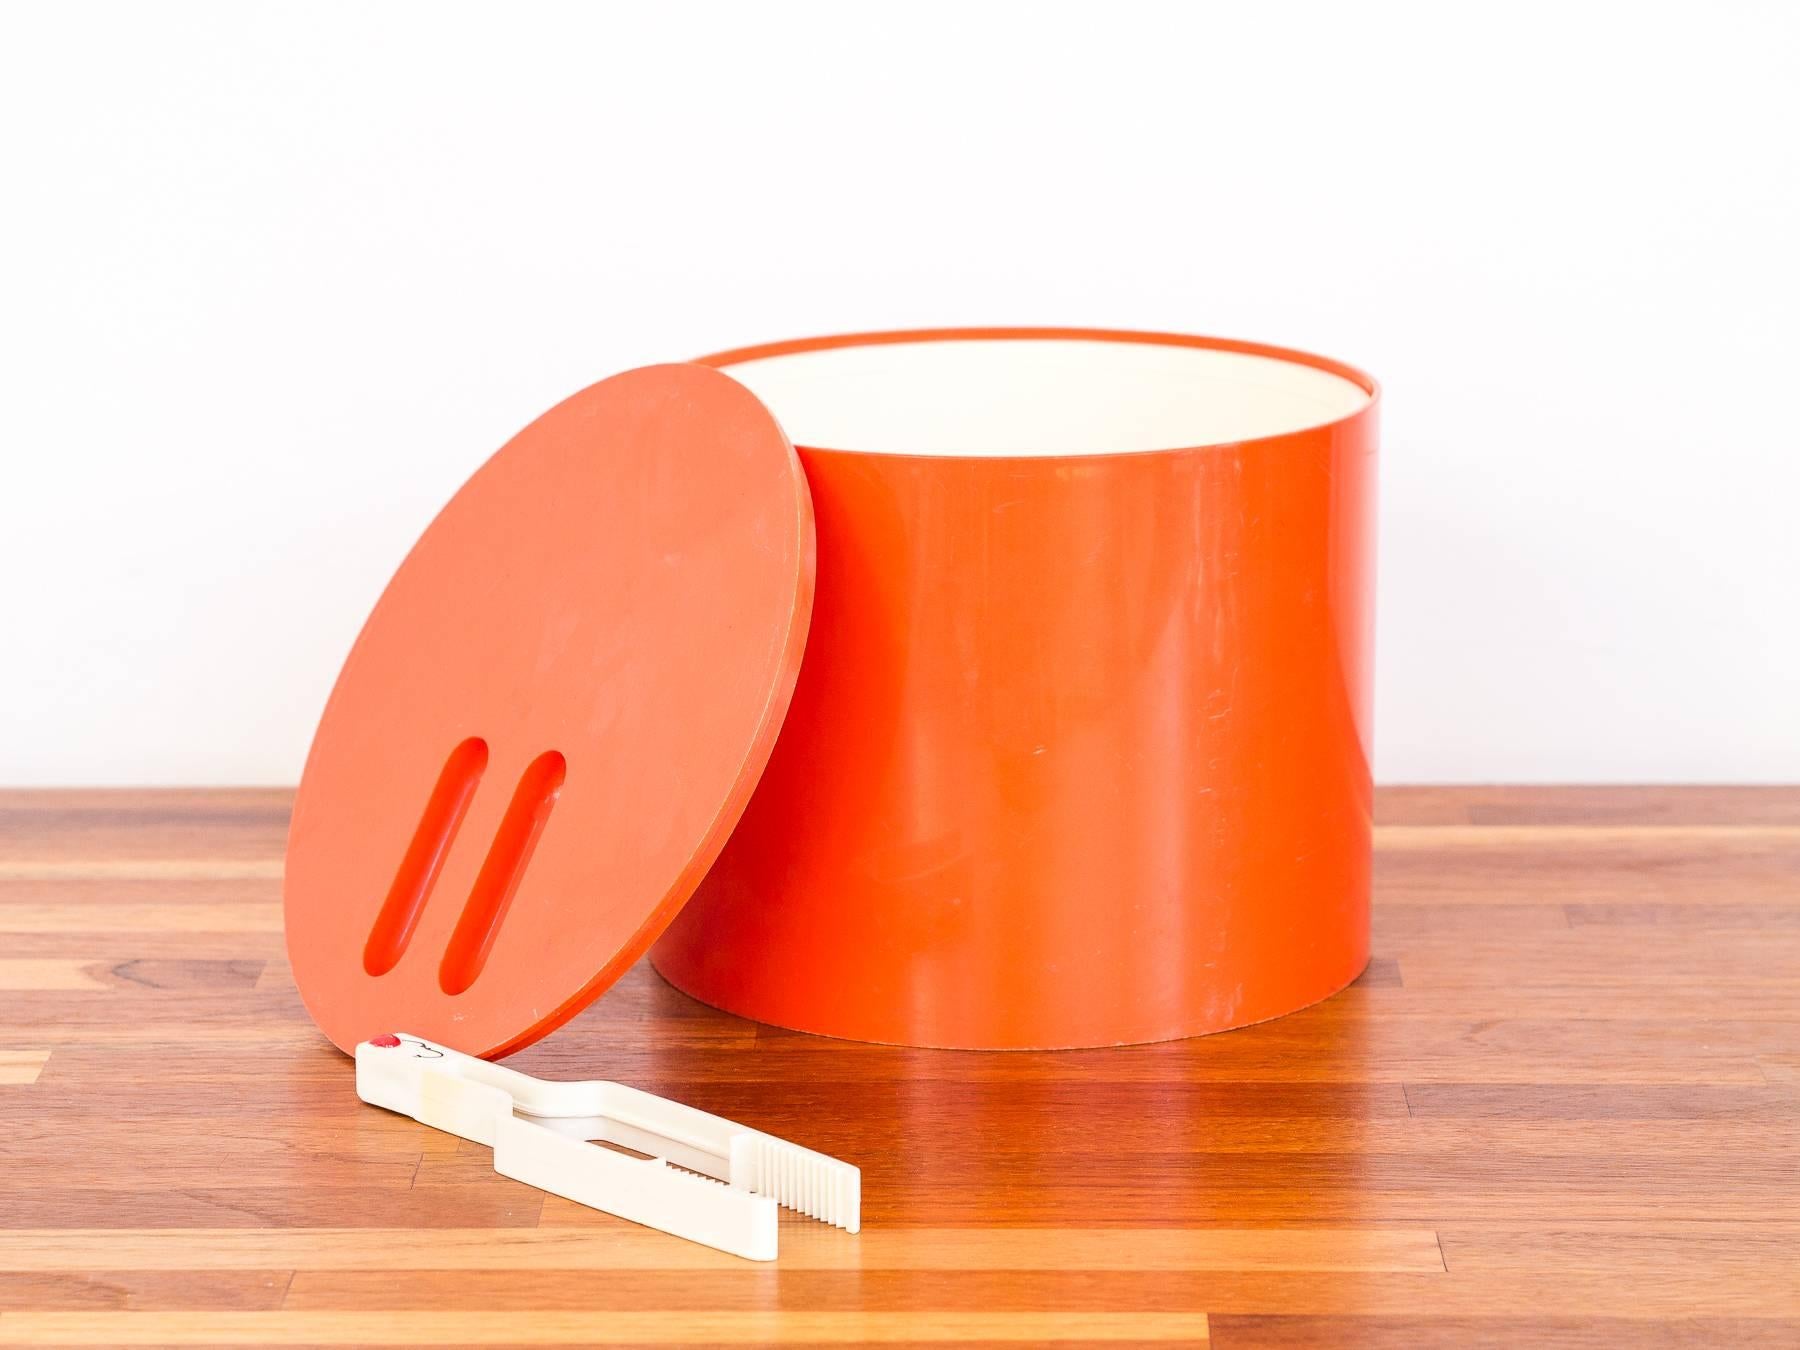 This Classic, 1970s design by Zalszupin, Mellone and Pedreira has been polished and is in great conditions. The inner bucket drains water and creates an air cushion with the exterior, so that the ice cubes melt slower and are always ready to serve.